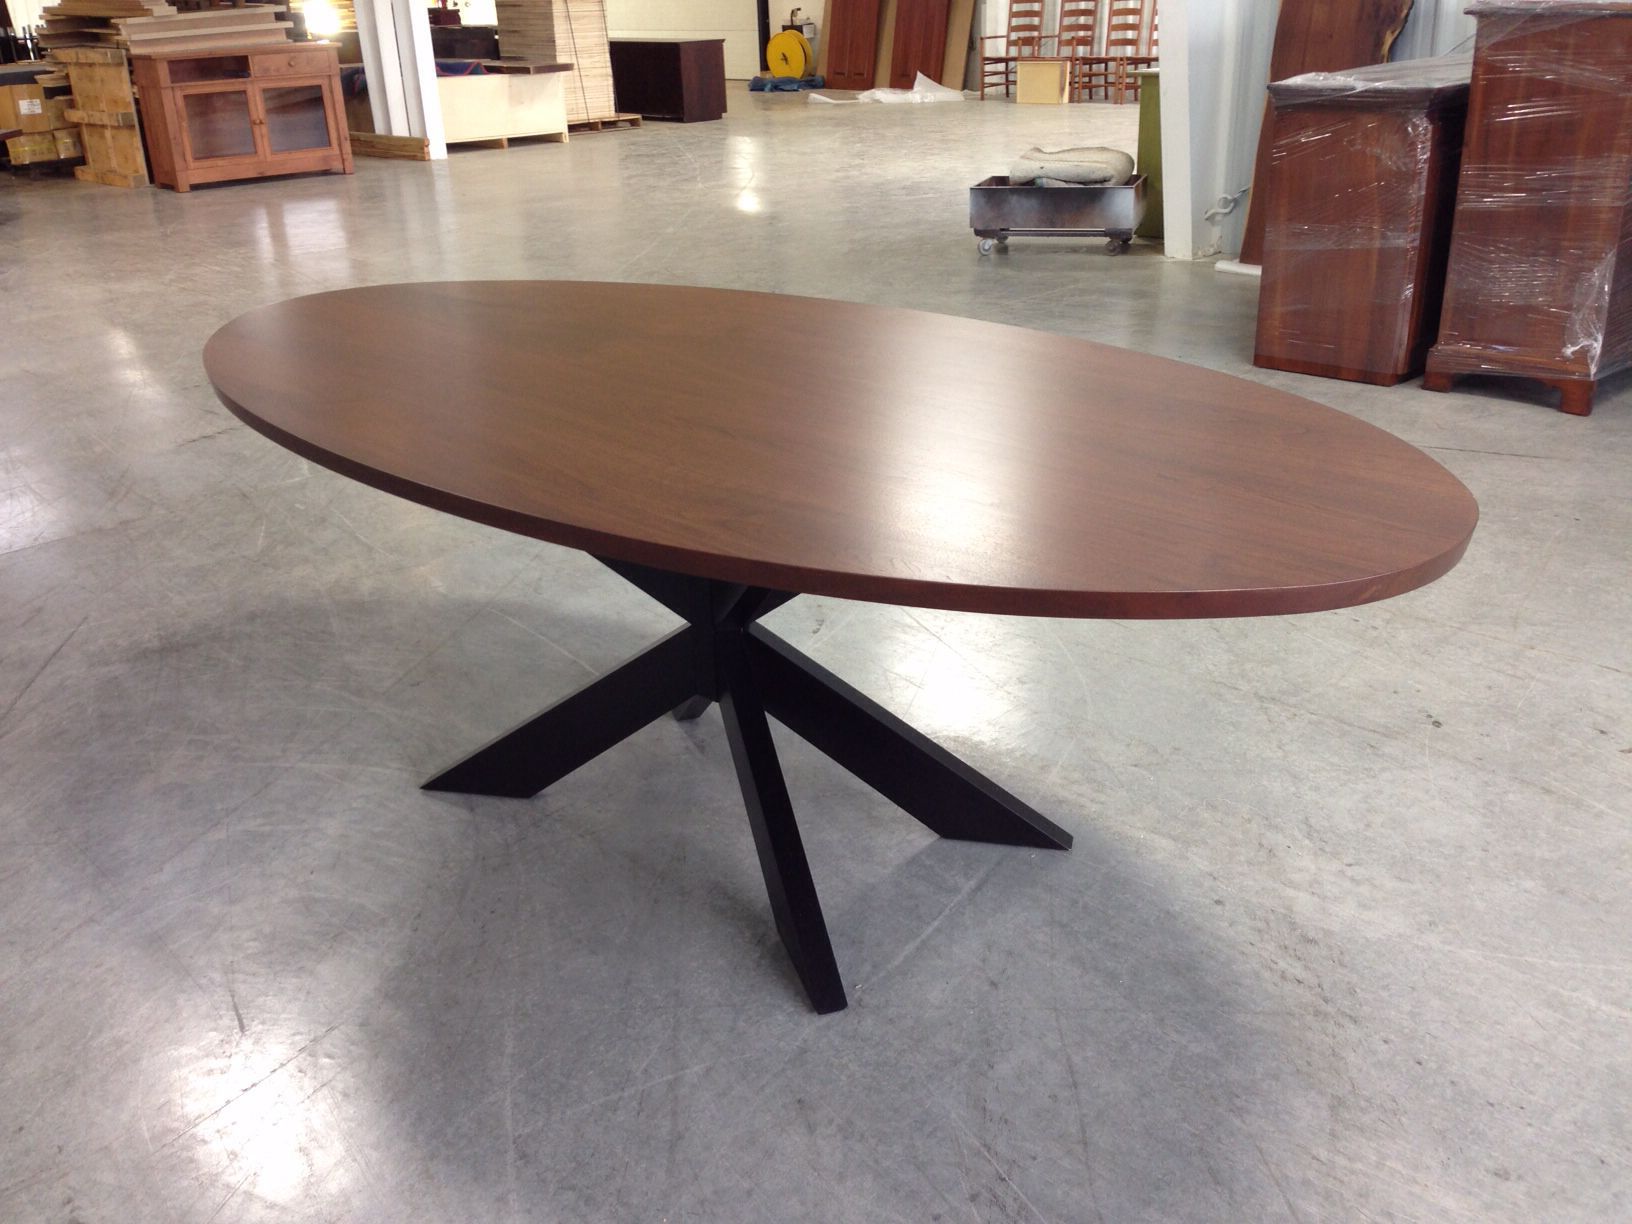 Gaspard Maple Solid Wood Pedestal Dining Tables With Latest The Michigan Avenue Dining Table Solid Walnut Oval Top (View 5 of 20)